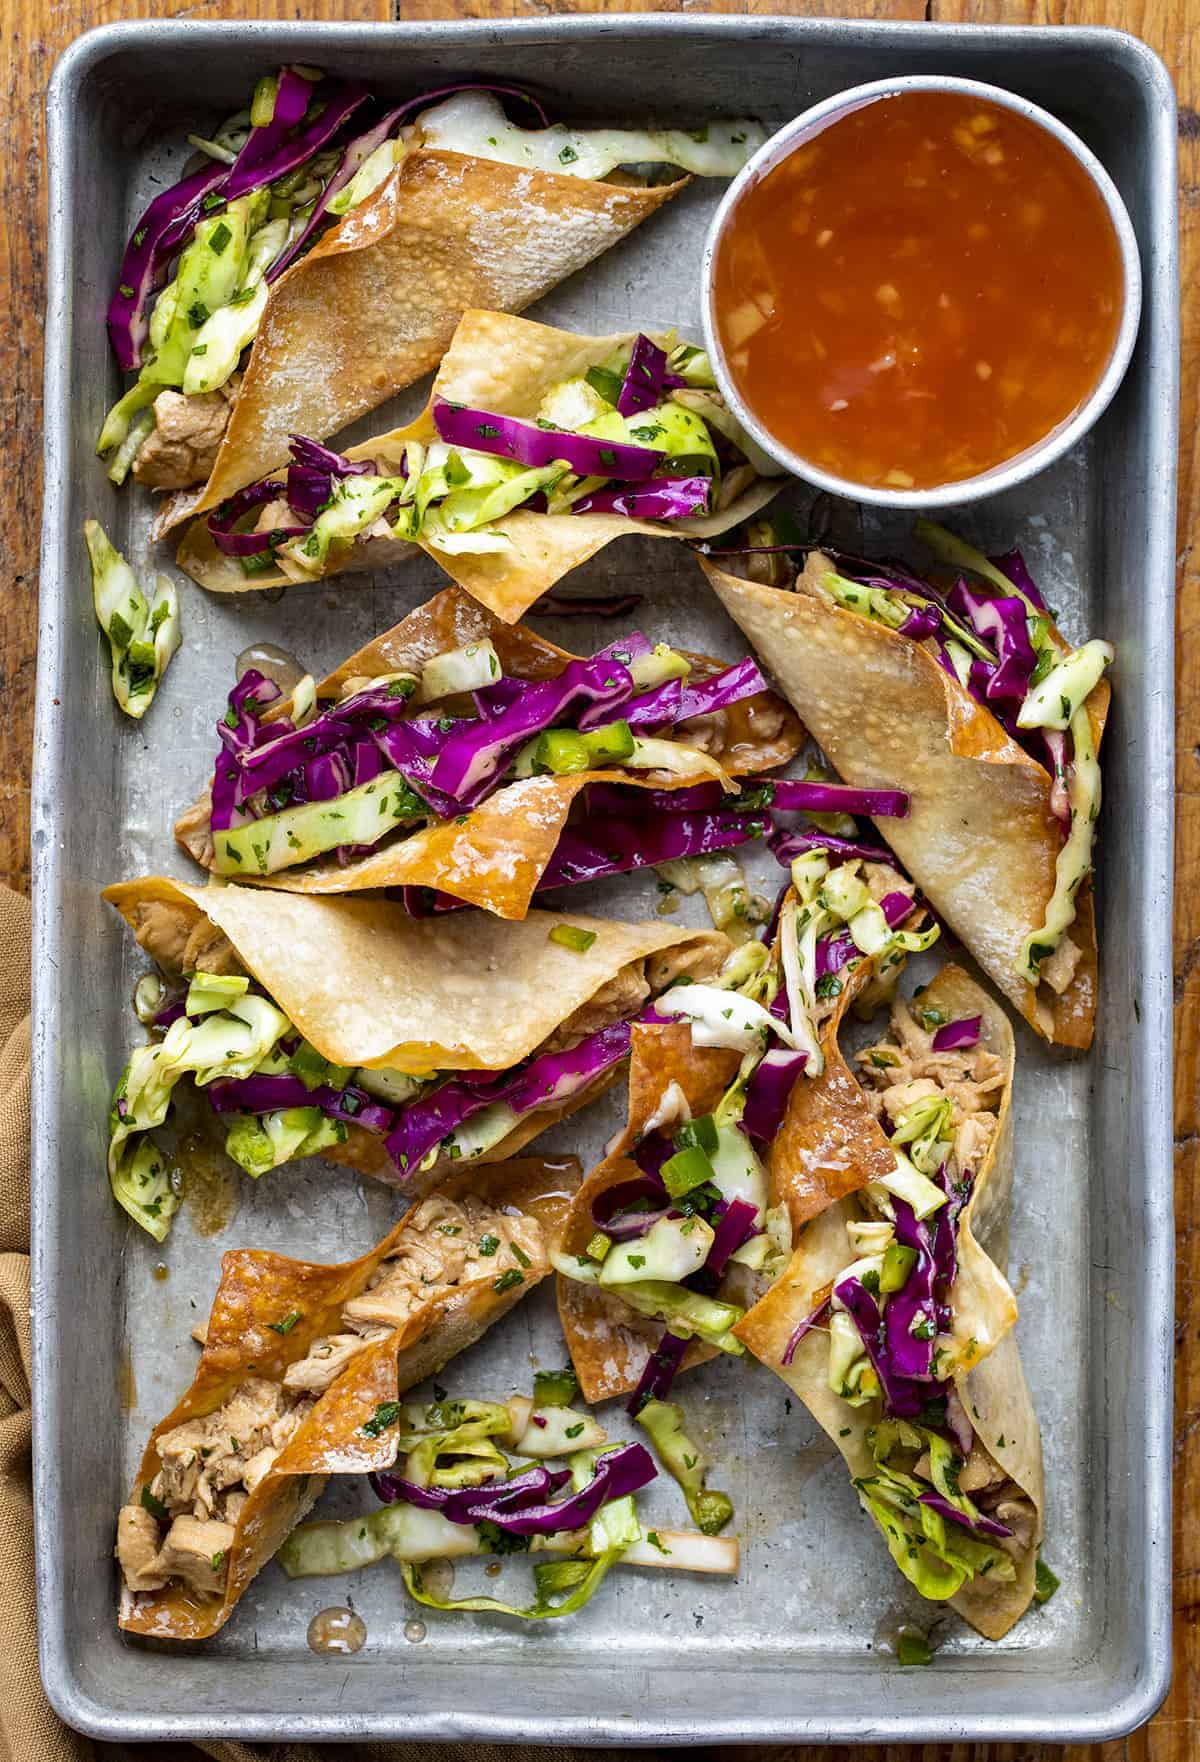 Pan of Chicken Wonton Tacos with Sweet Chili Sauce from Overhead.